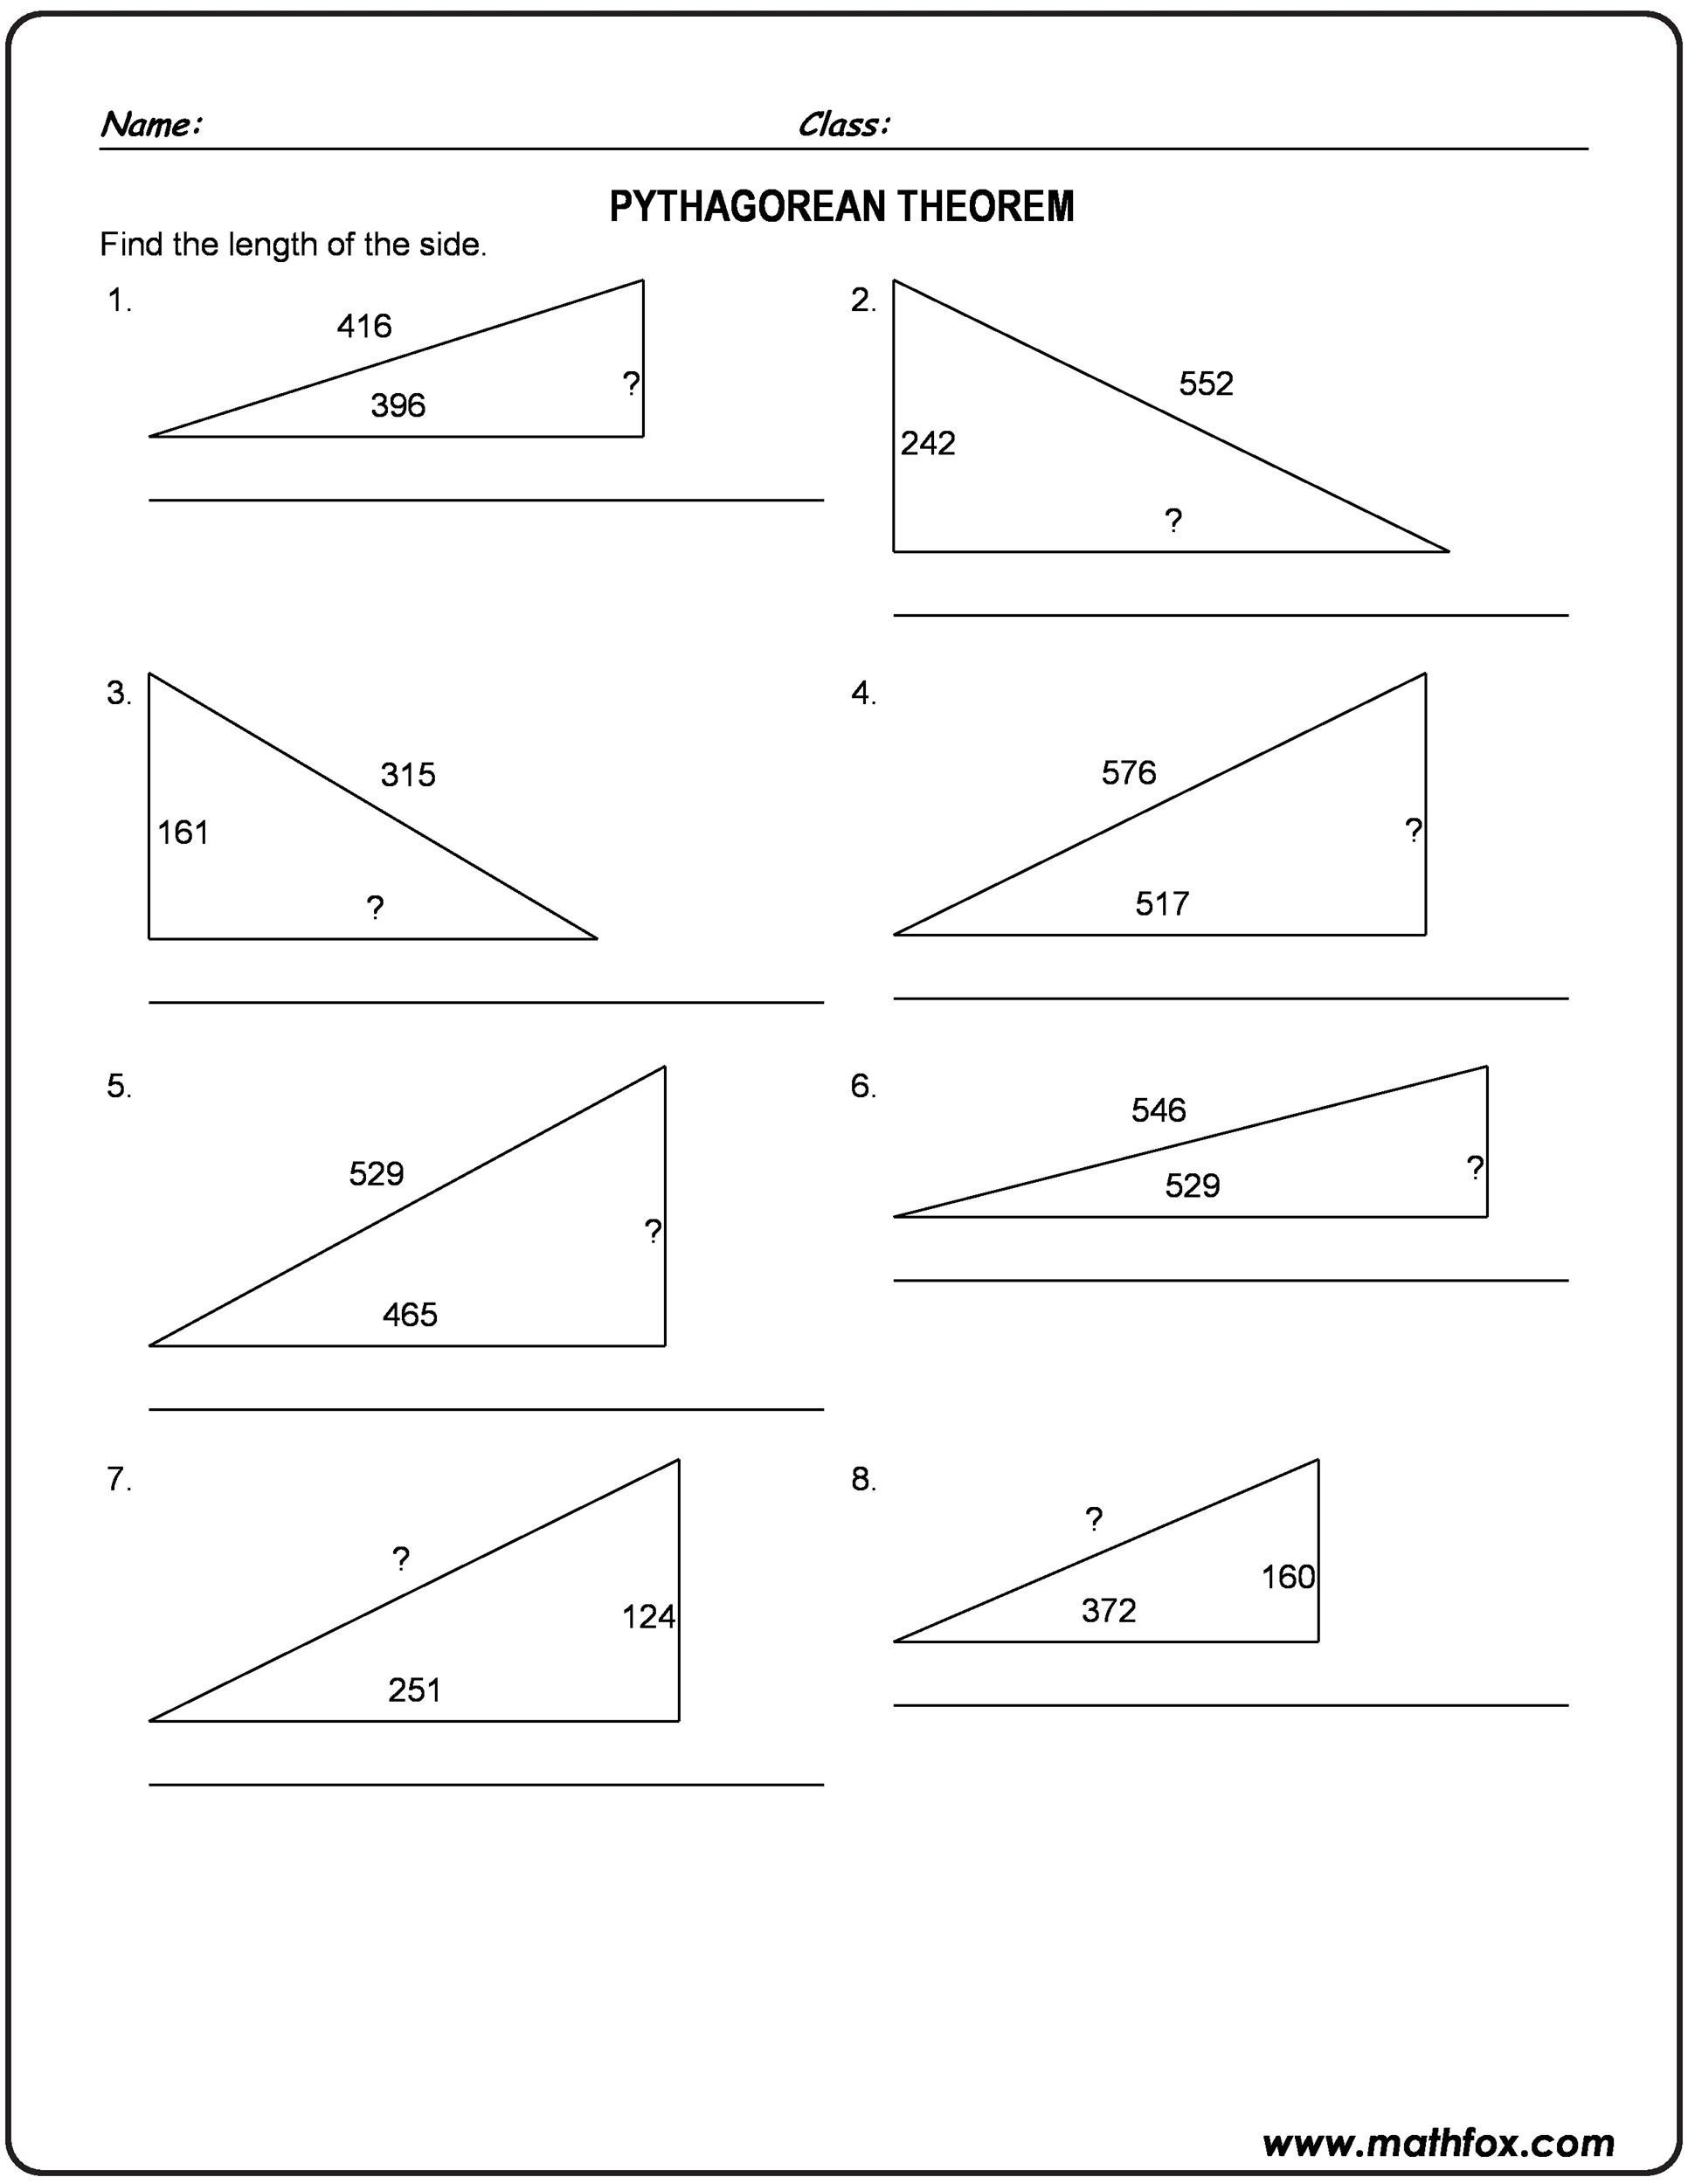 48 Pythagorean Theorem Worksheet with Answers [Word + PDF]